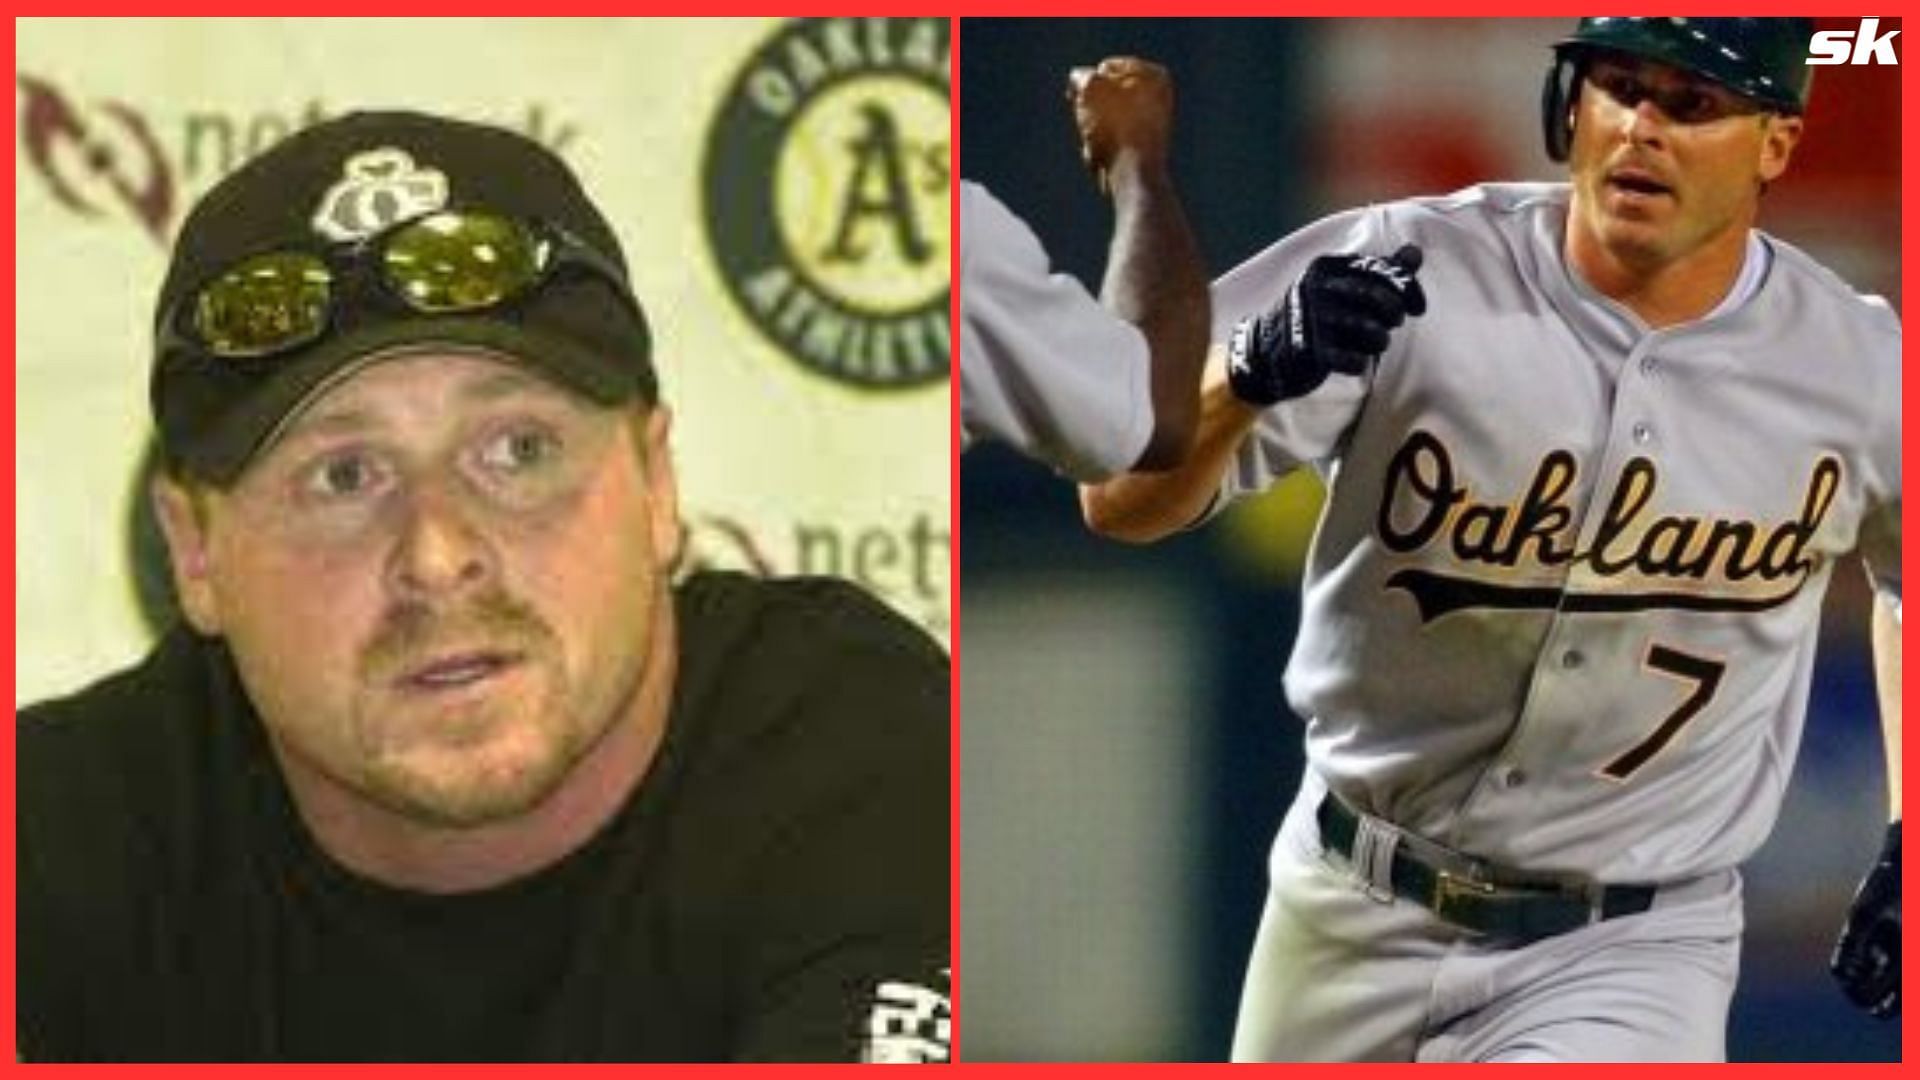 Jeremy Giambi: Jeremy Giambi once came clean about his PED use